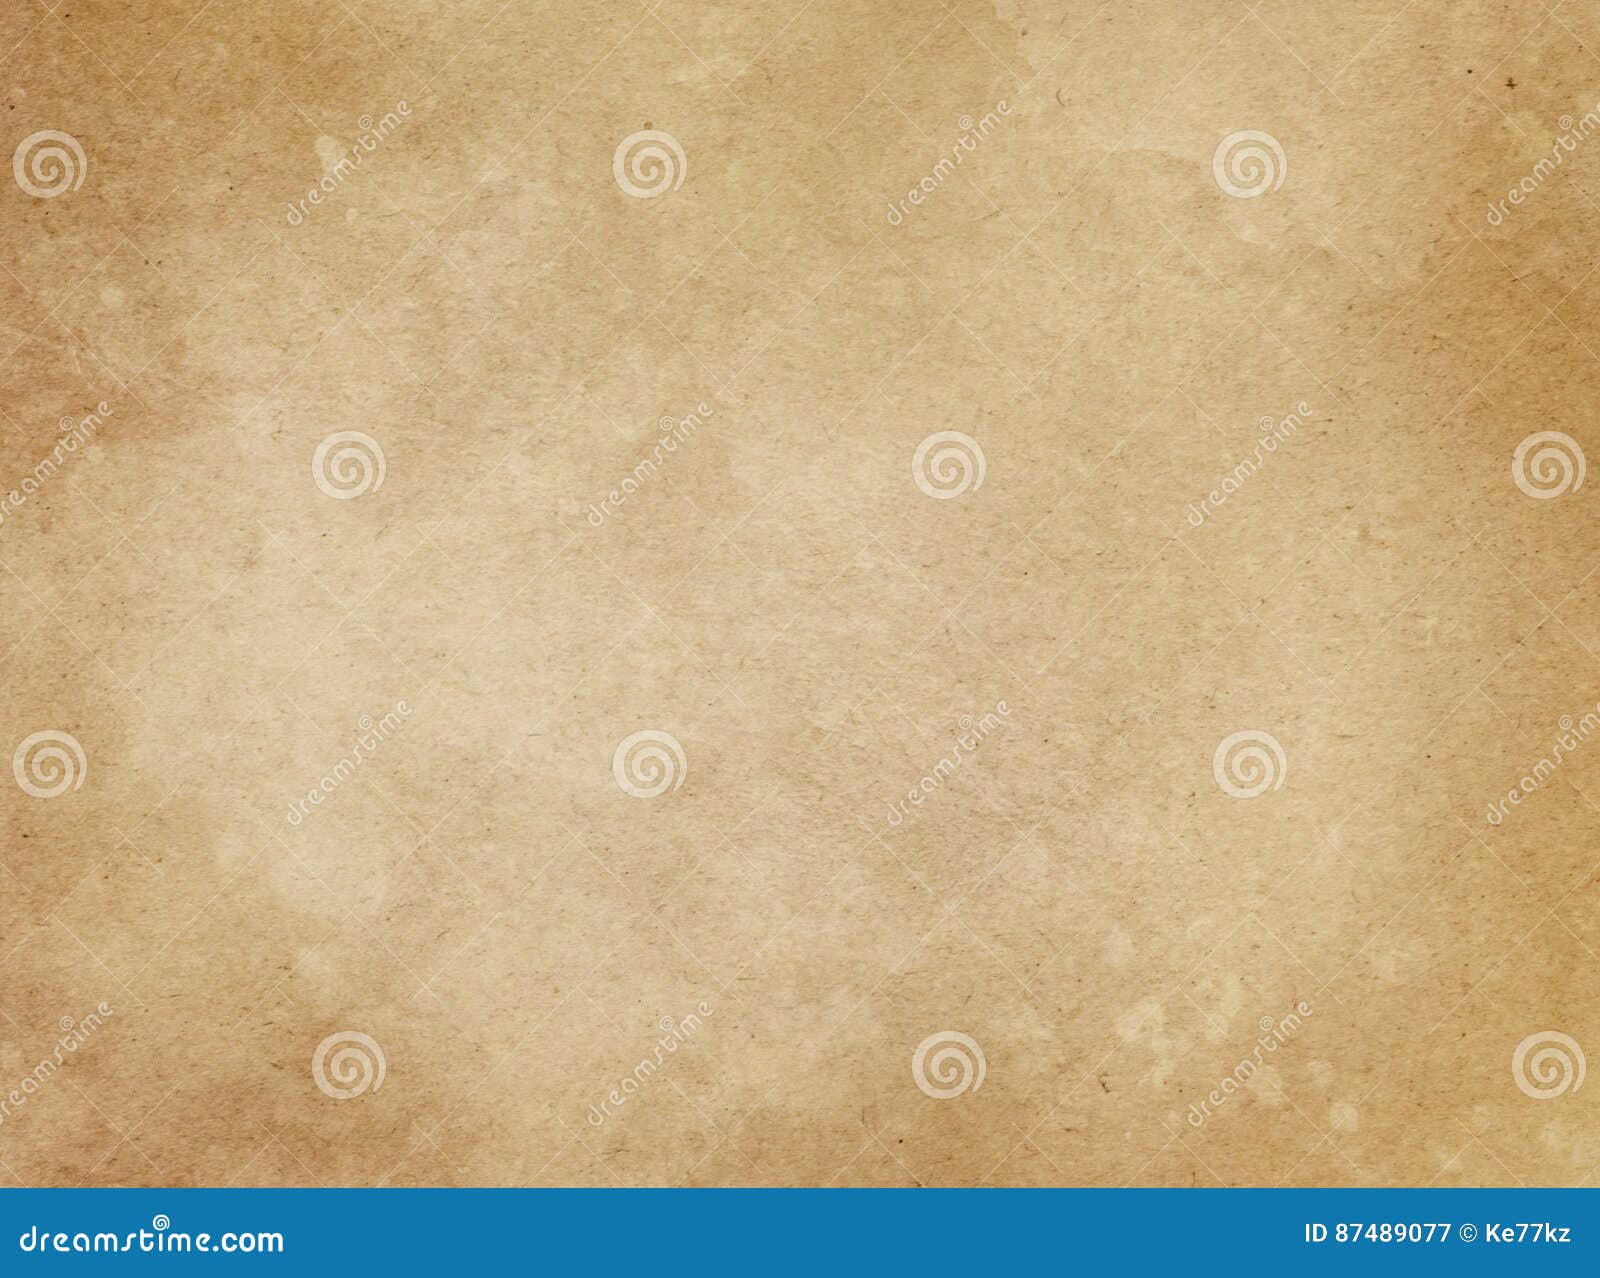 Old Stained Paper Texture or Background. Stock Image - Image of ancient ...